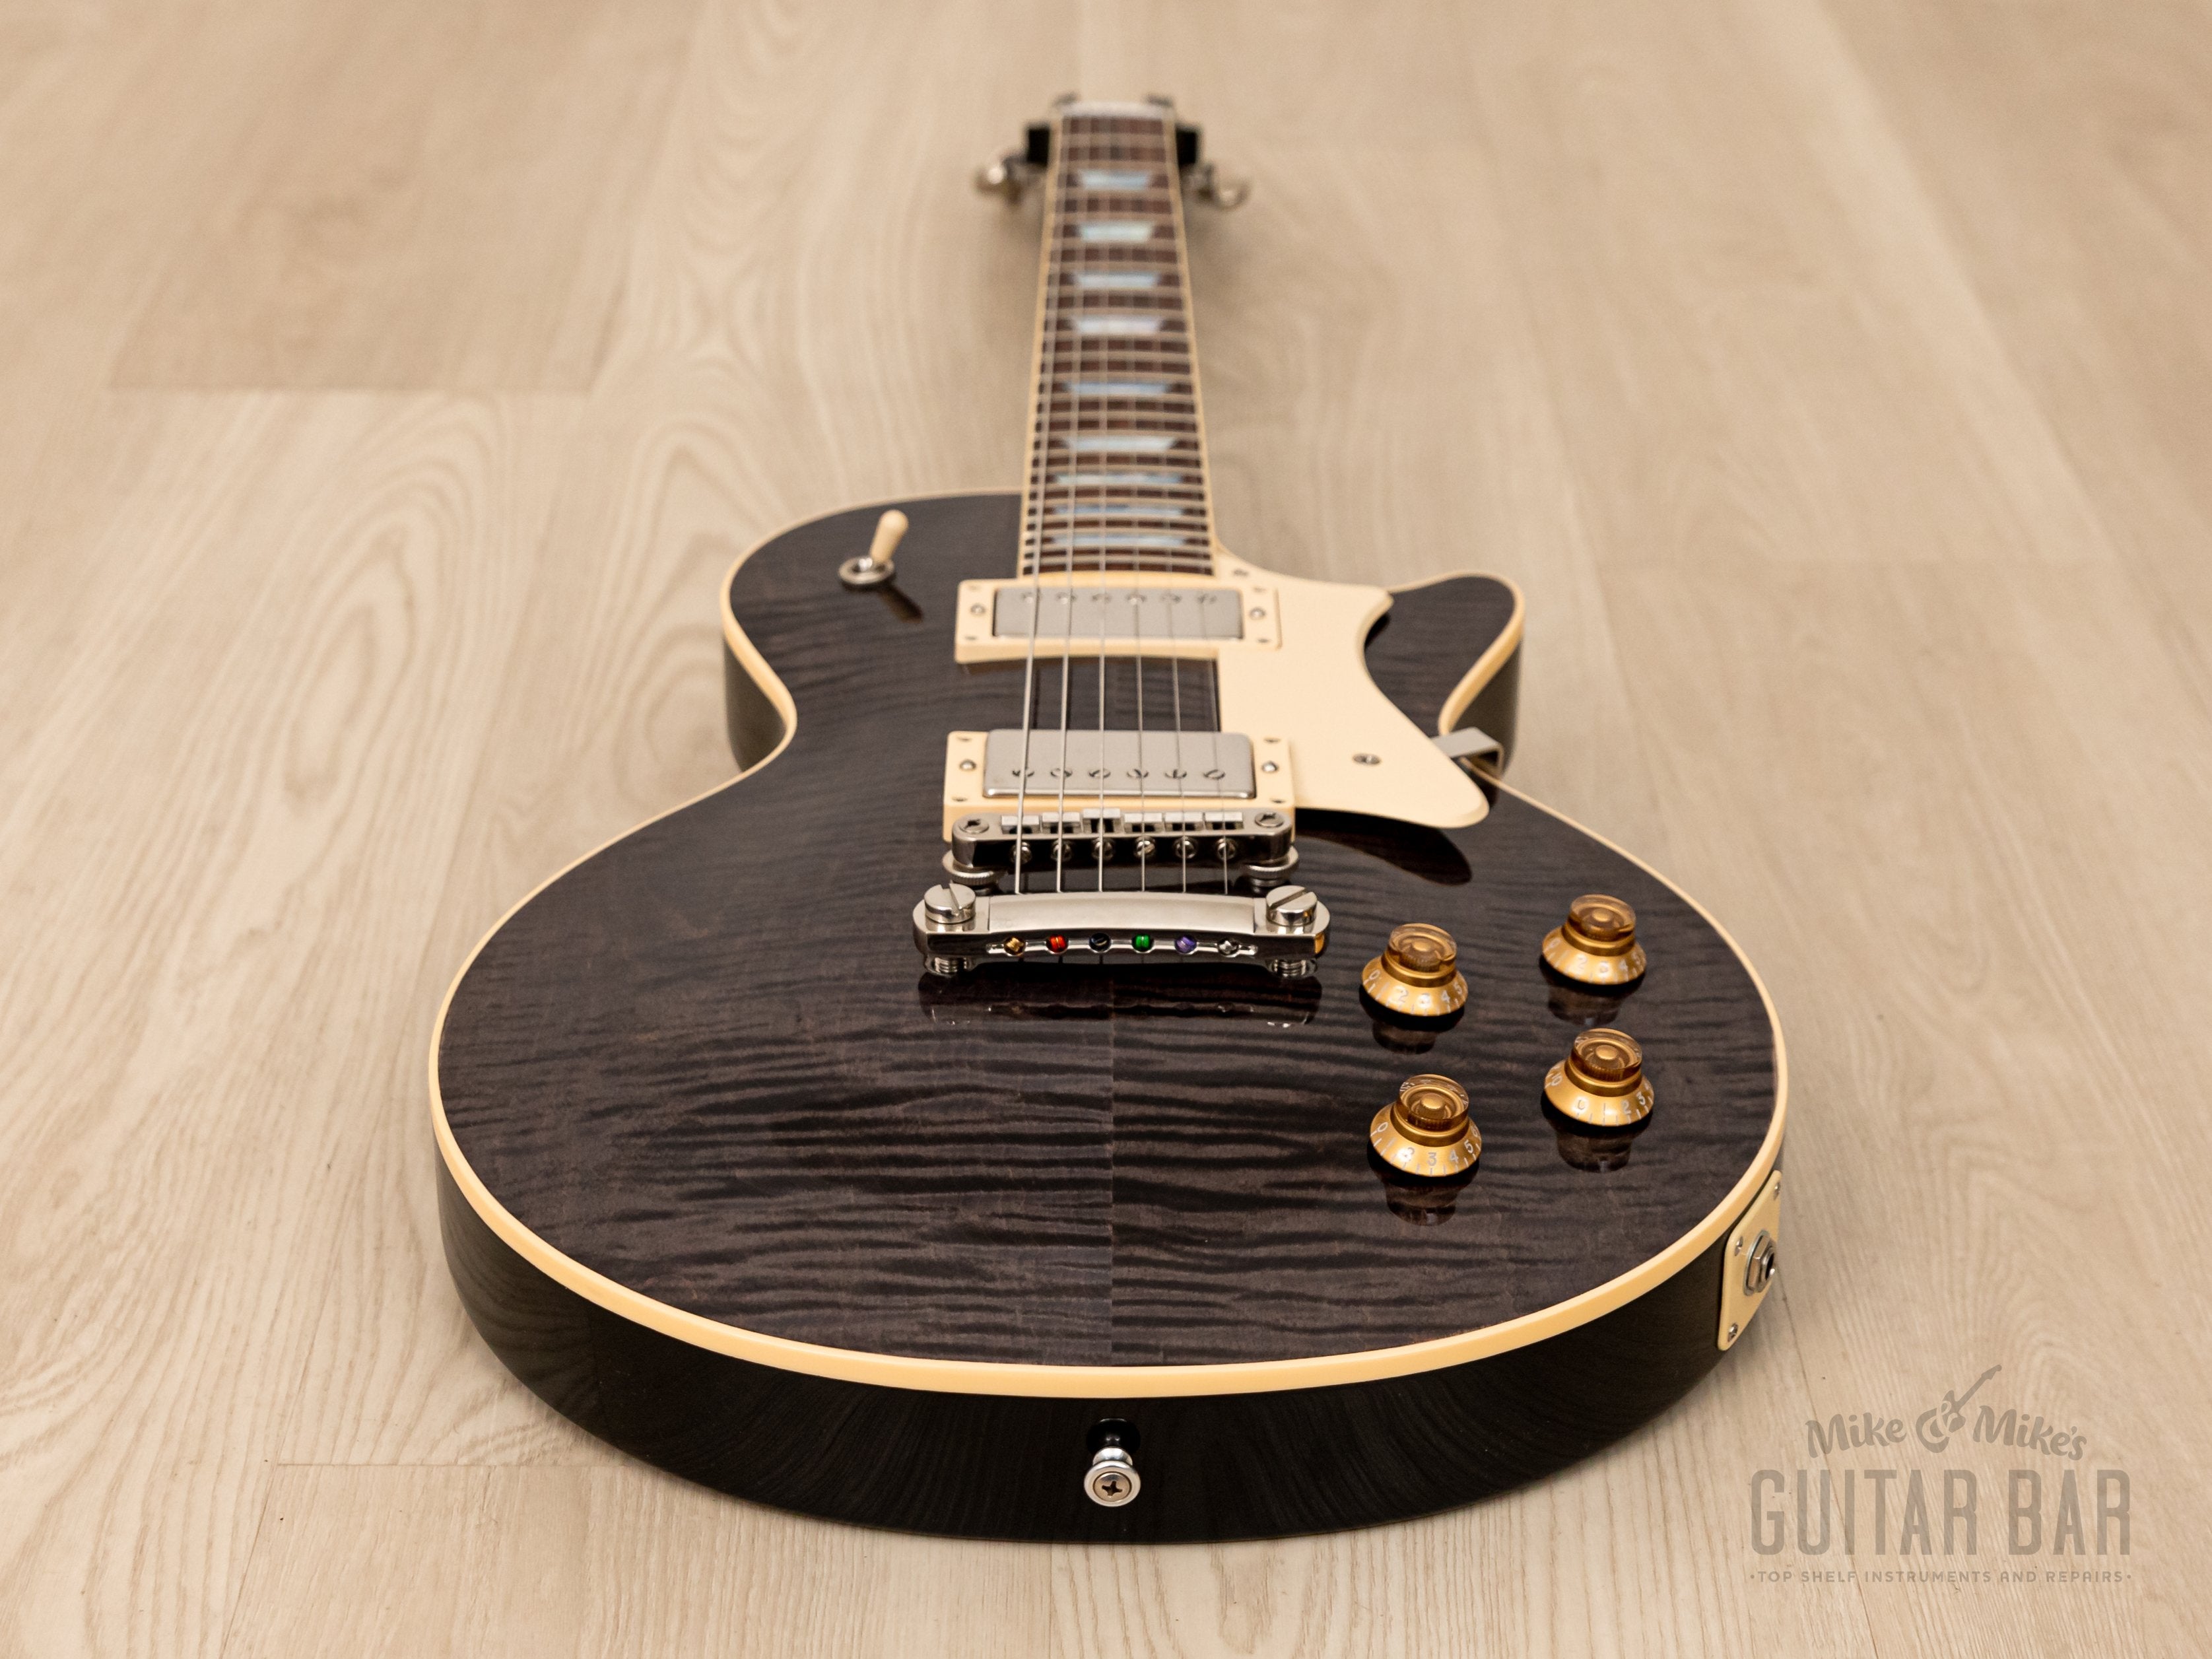 2020 Heritage H-150 Flame Top Black Translucent, Near-Mint w/ Duncan SH-1 PAFs, Case & Tags, Kalamazoo USA-Made